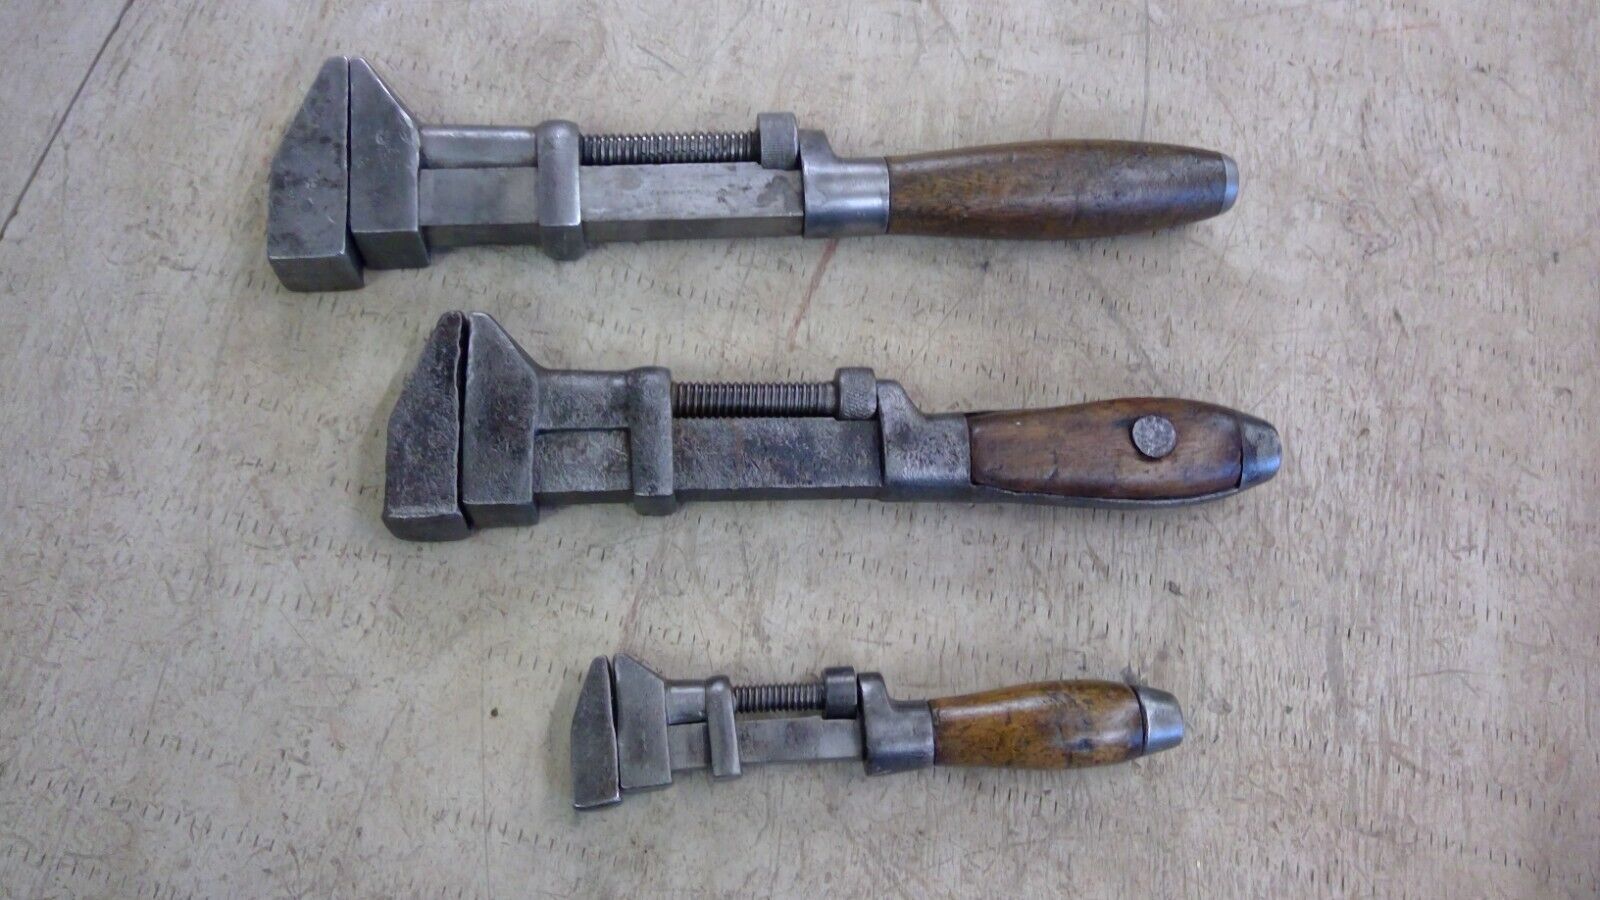 Lot of 3 Antique/Vintage Wood Handle Monkey Wrenches old tools farm